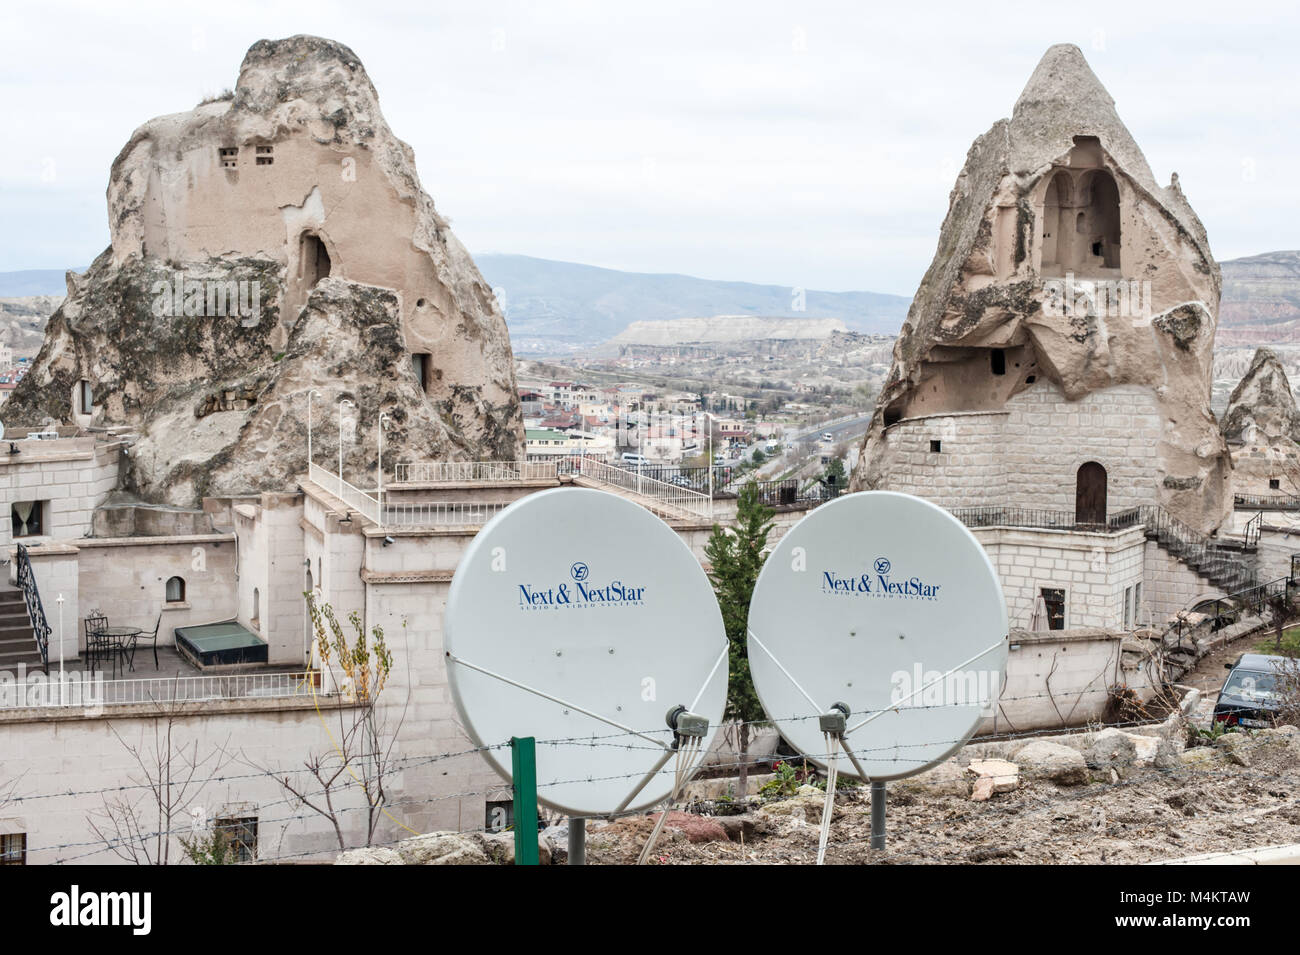 Ancient carved rock houses with satellite dishes in Cappadocia, Turkey Stock Photo